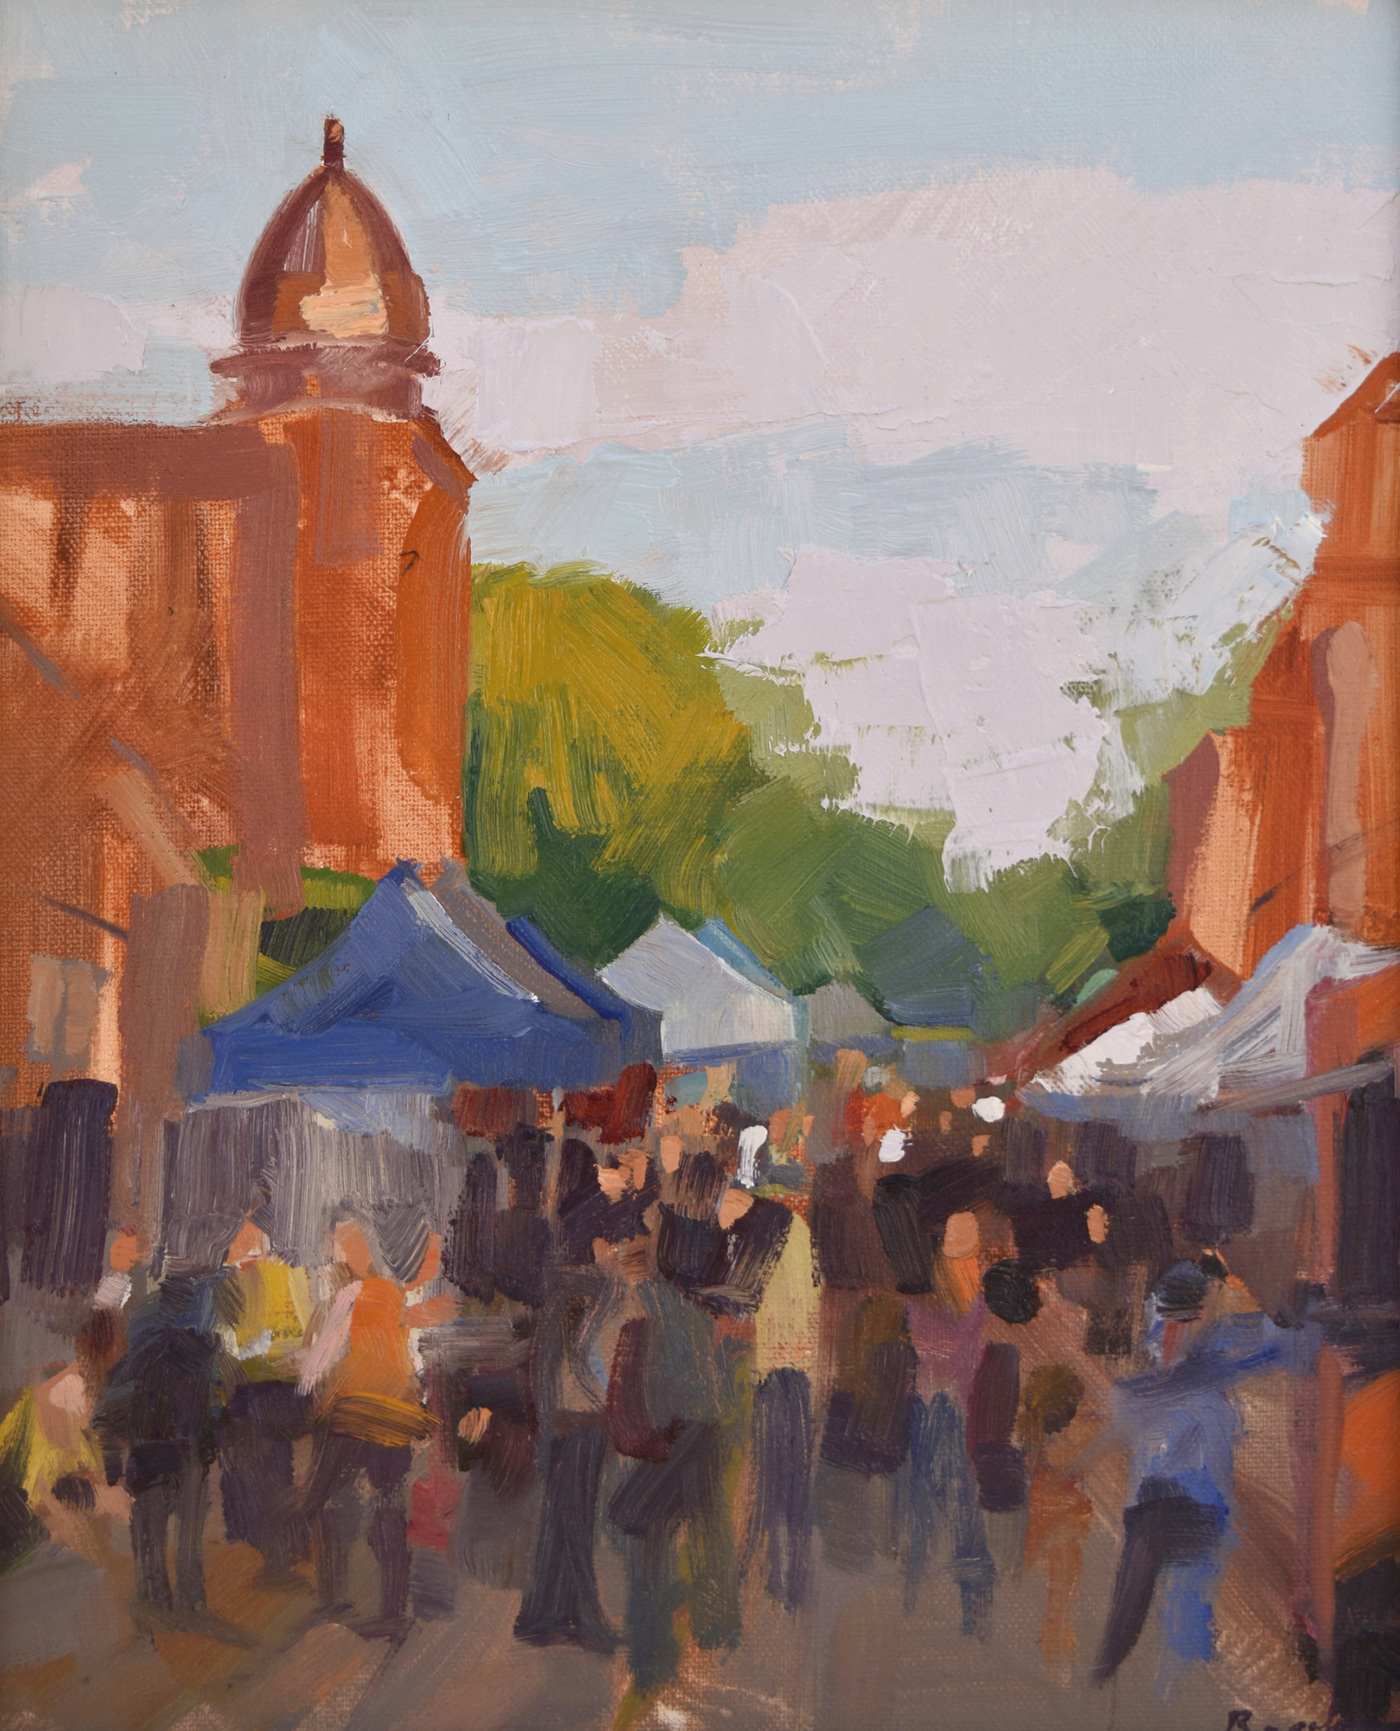 oil painting of street scene with crowds in the middle; surrounded by tall buildings